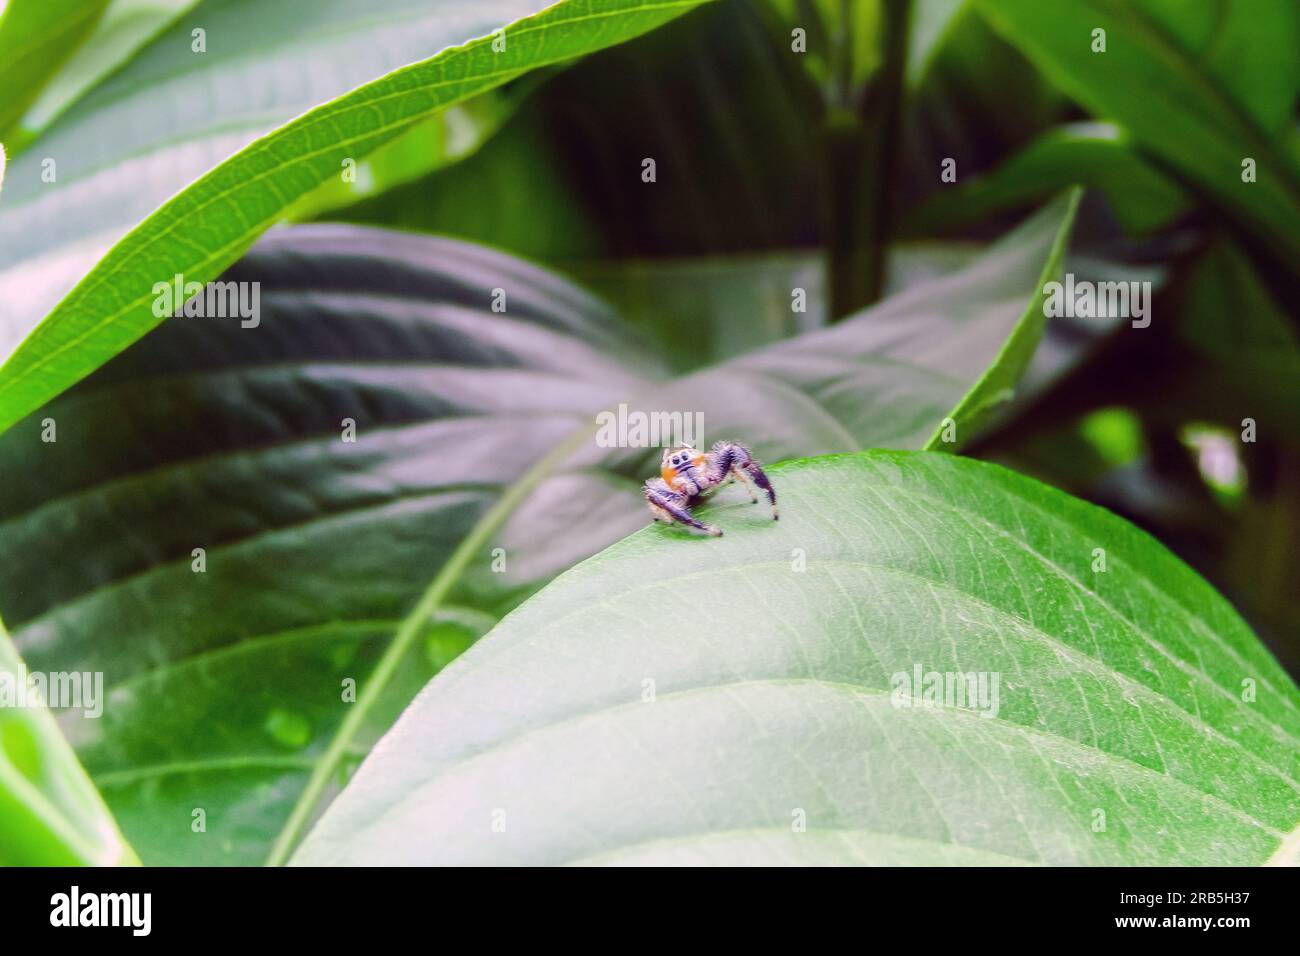 Night Scene: Hyllus semicupreus, the Jumping Spider, Waiting for Prey on a Green Leaf Stock Photo